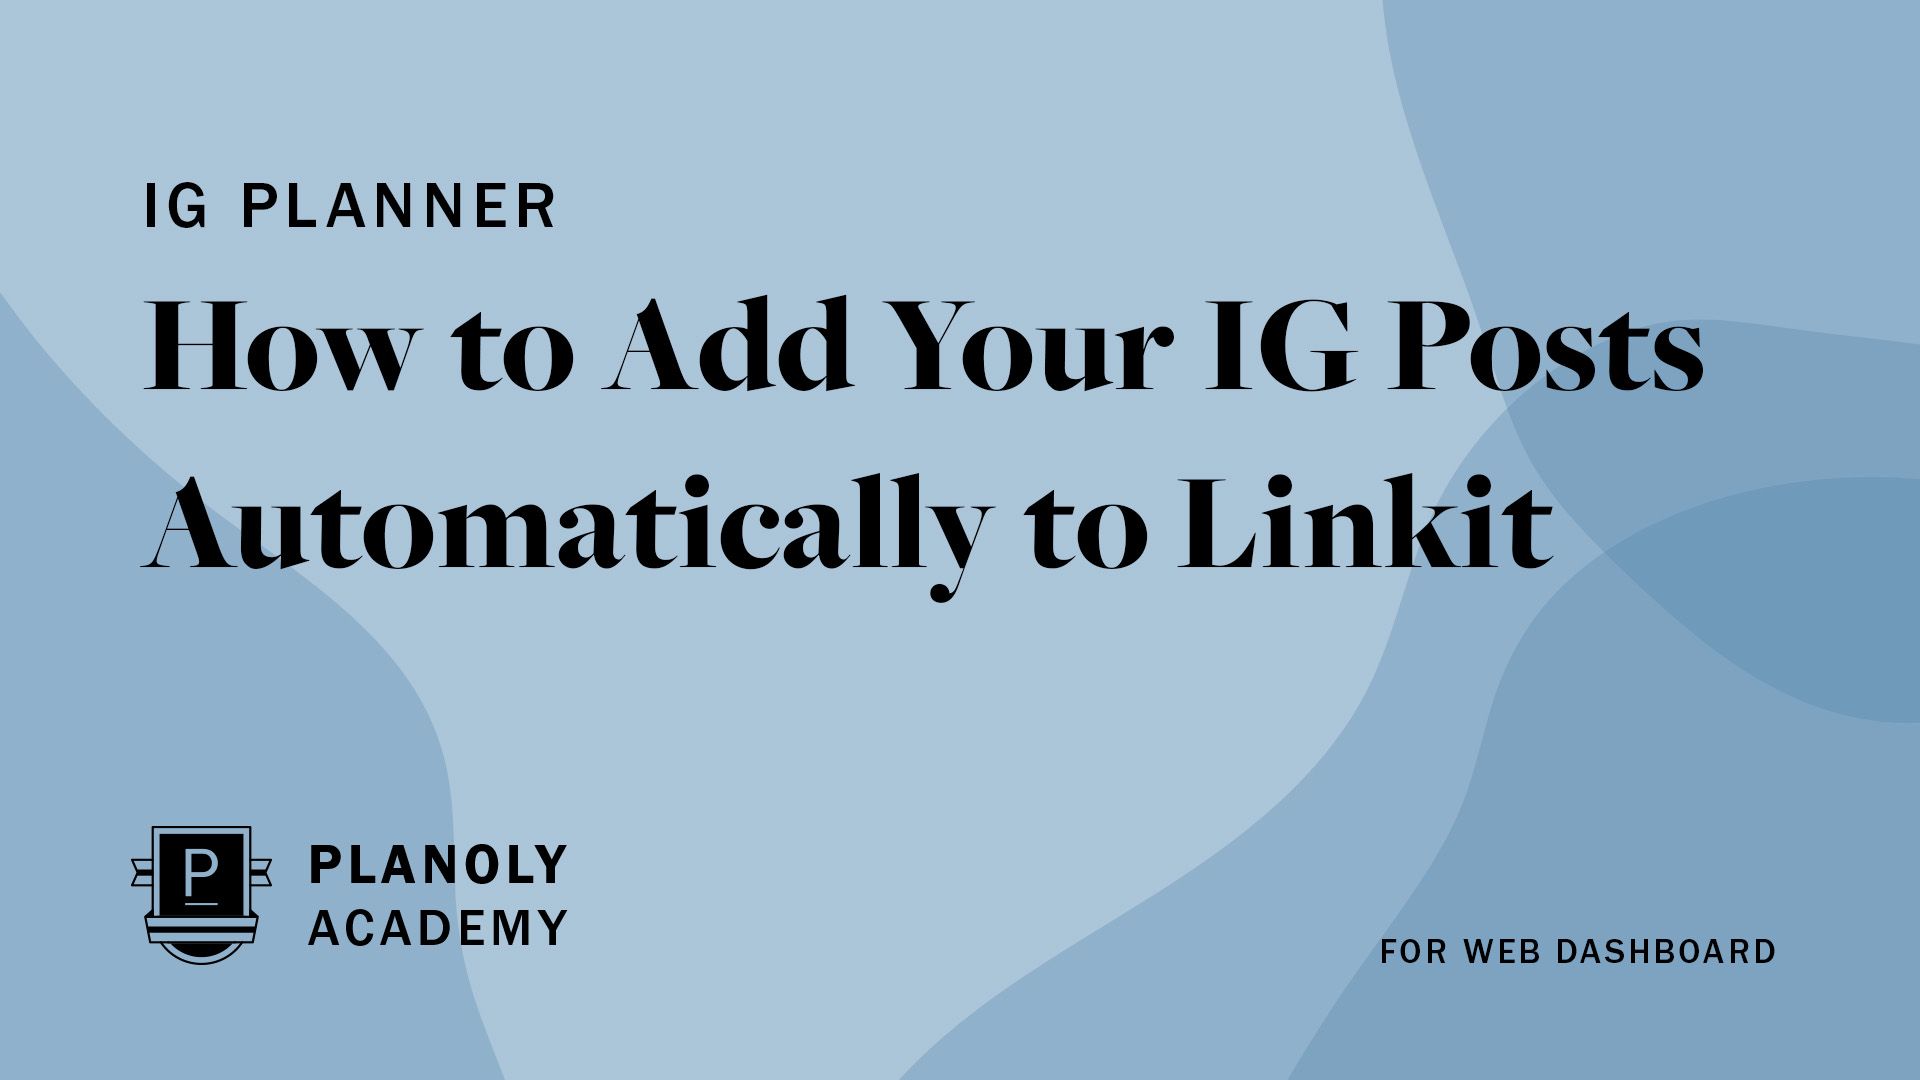 How to Add Your IG Posts Automatically to Linkit on the Web Dashboard